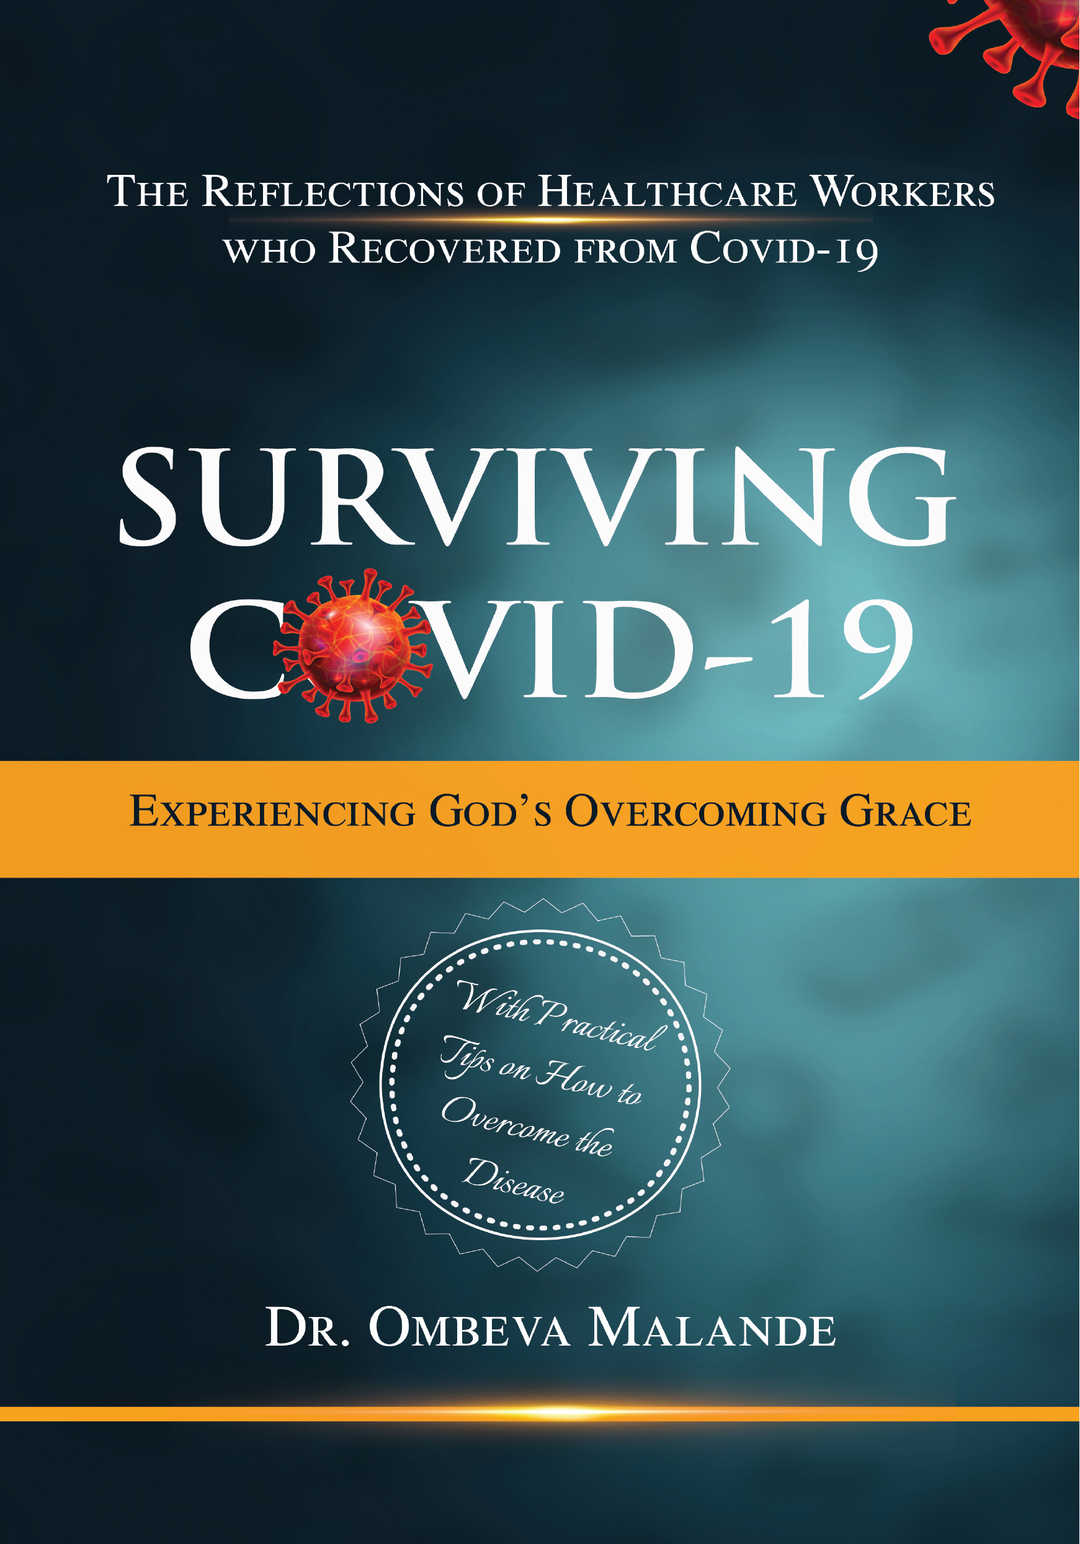 SURVING COVID-19: Experiencing God's Overcoming Grace